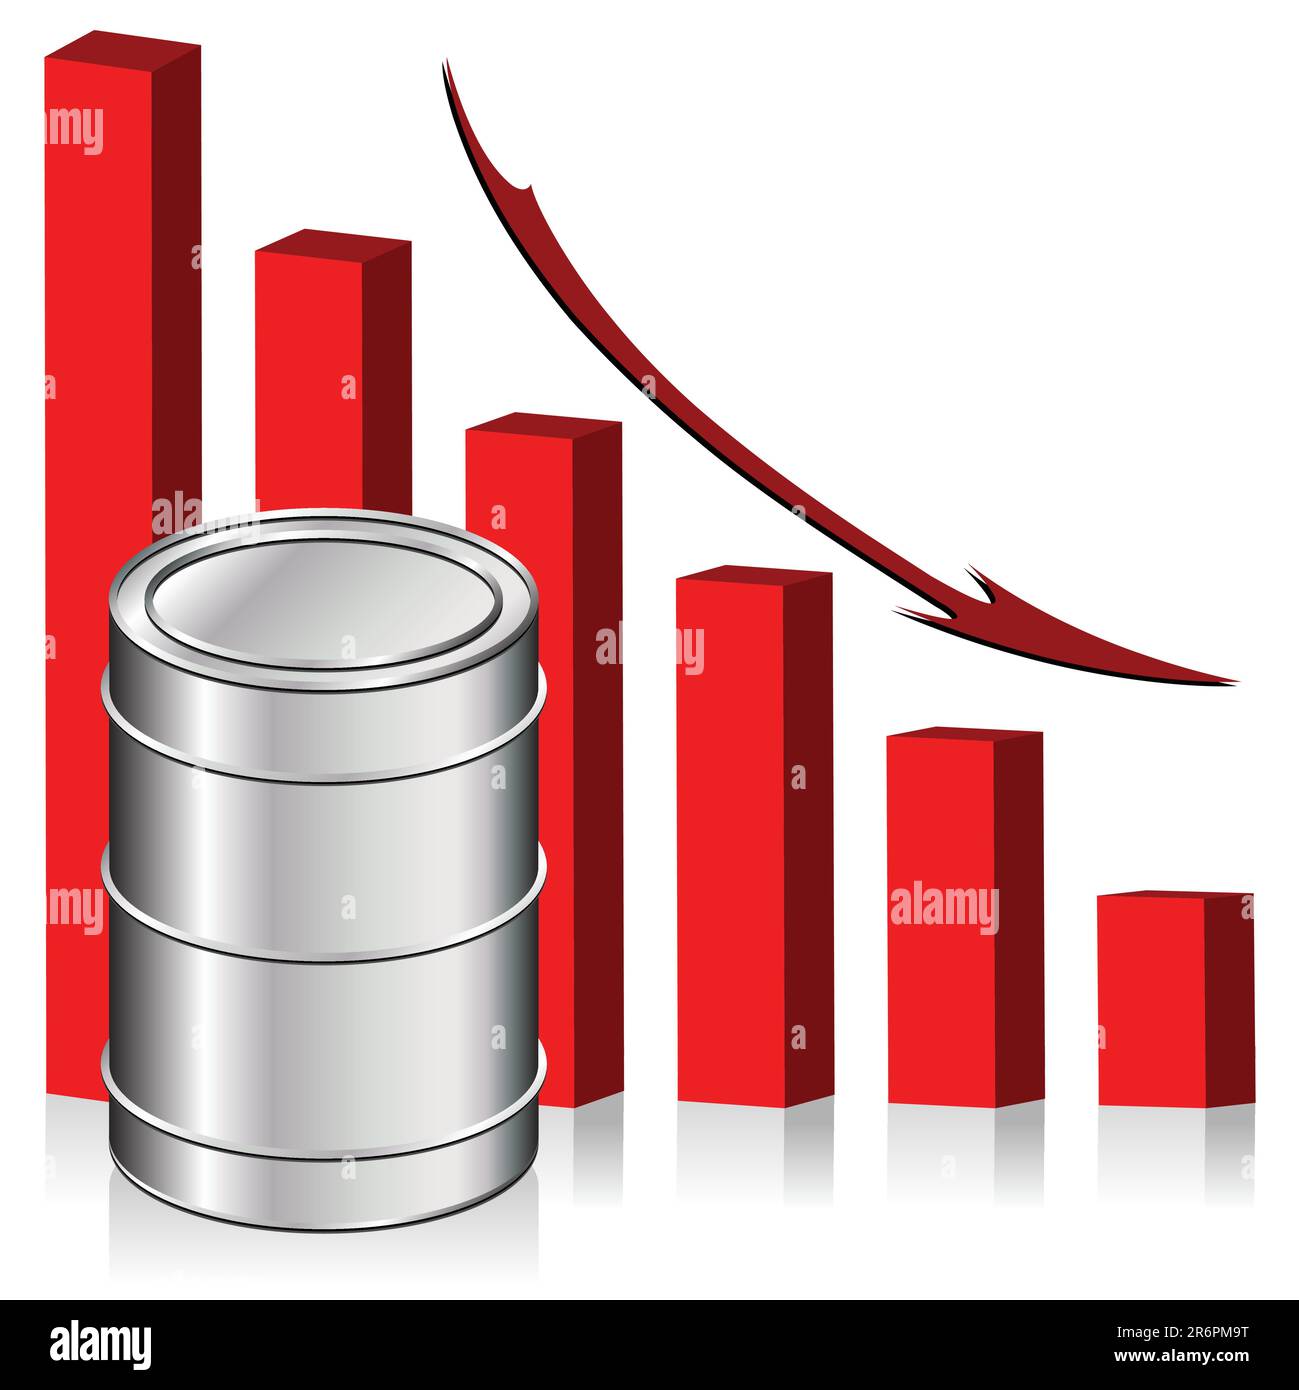 Oil barrel over graphic bar chart with lowering prices Stock Vector